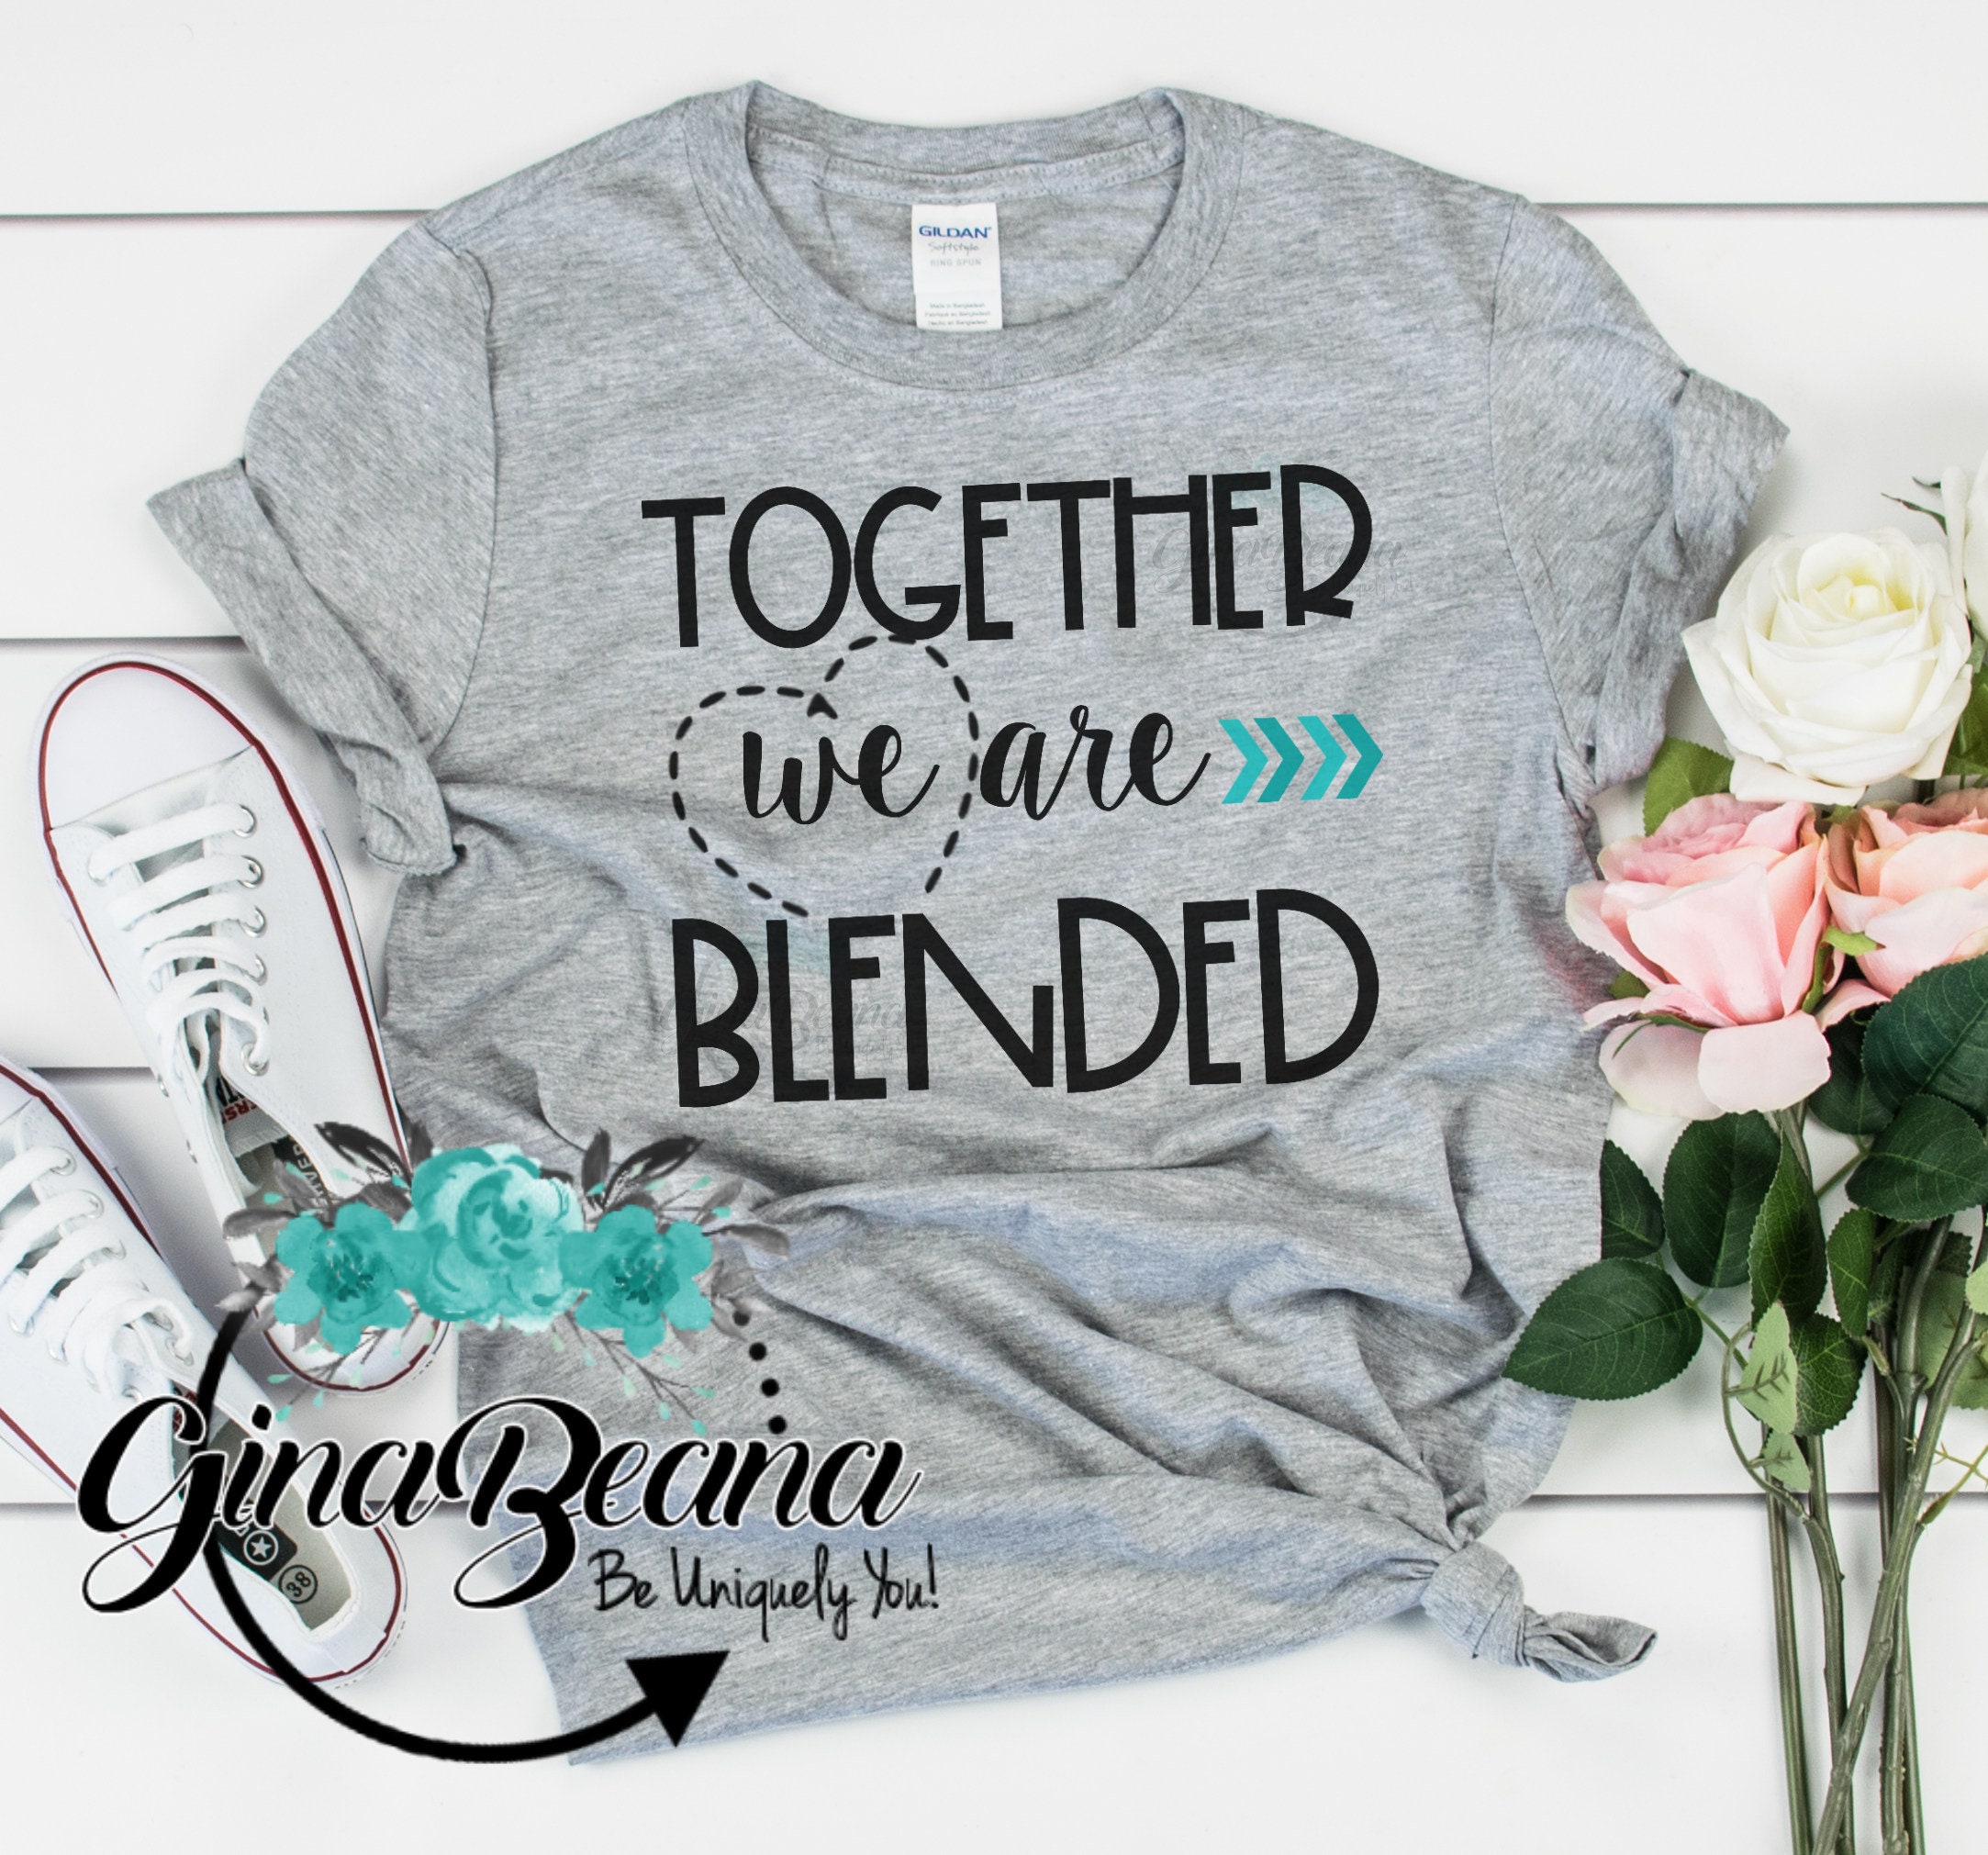 Together We Are Blended, Foster Mom Child Gift, Adoption Shirt, Stepchildren Step Parent Gifts, Matching New Blended Family Shirts, Ginabeana